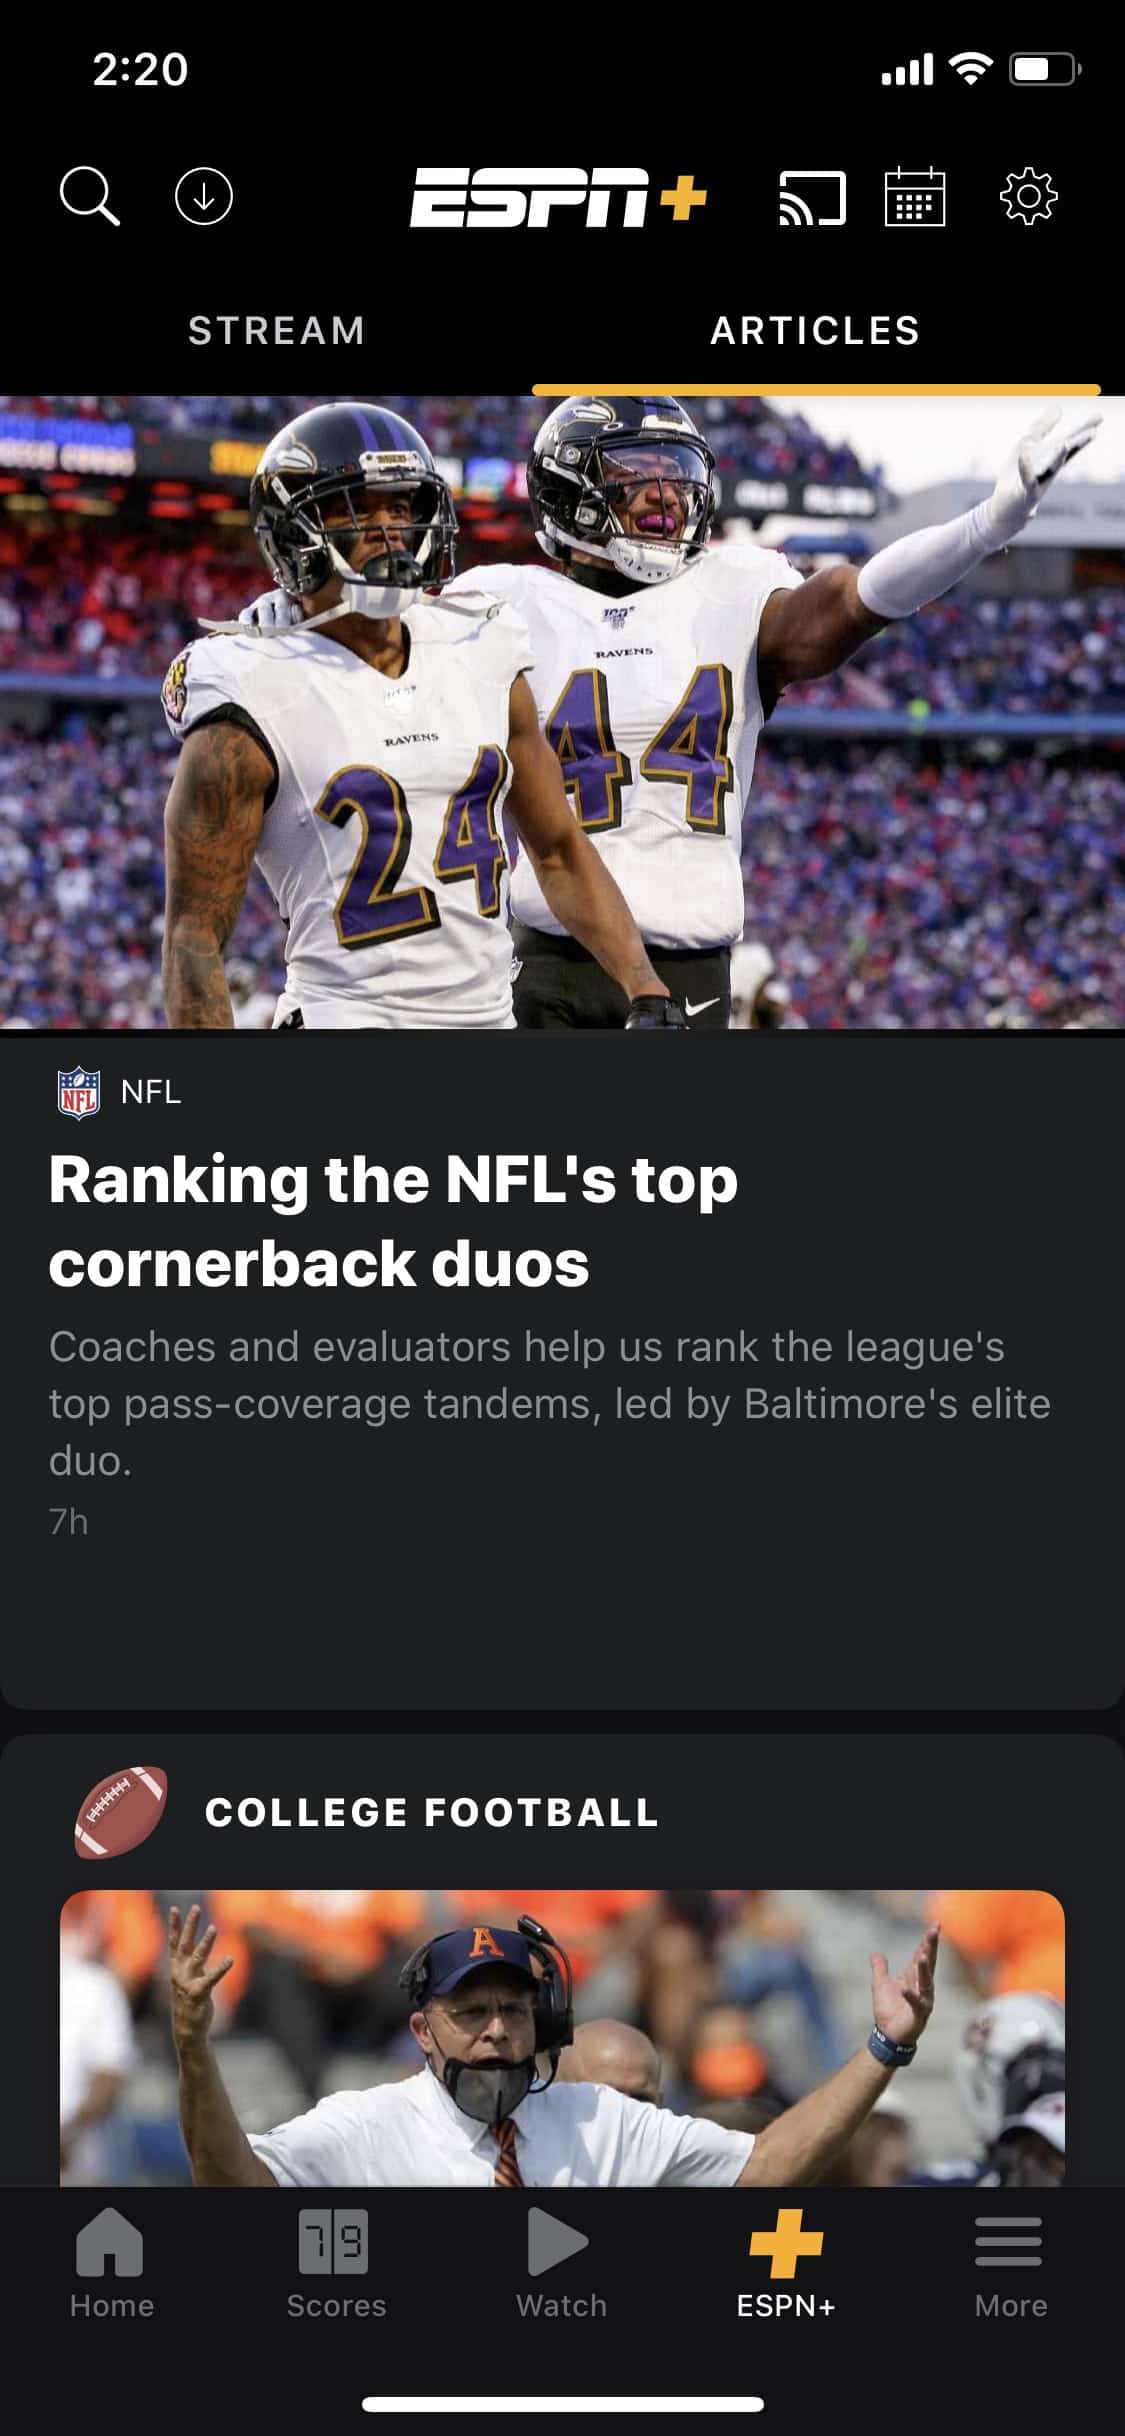 Screenshot of articles under the “Articles” tab on ESPN+ in the ESPN app.